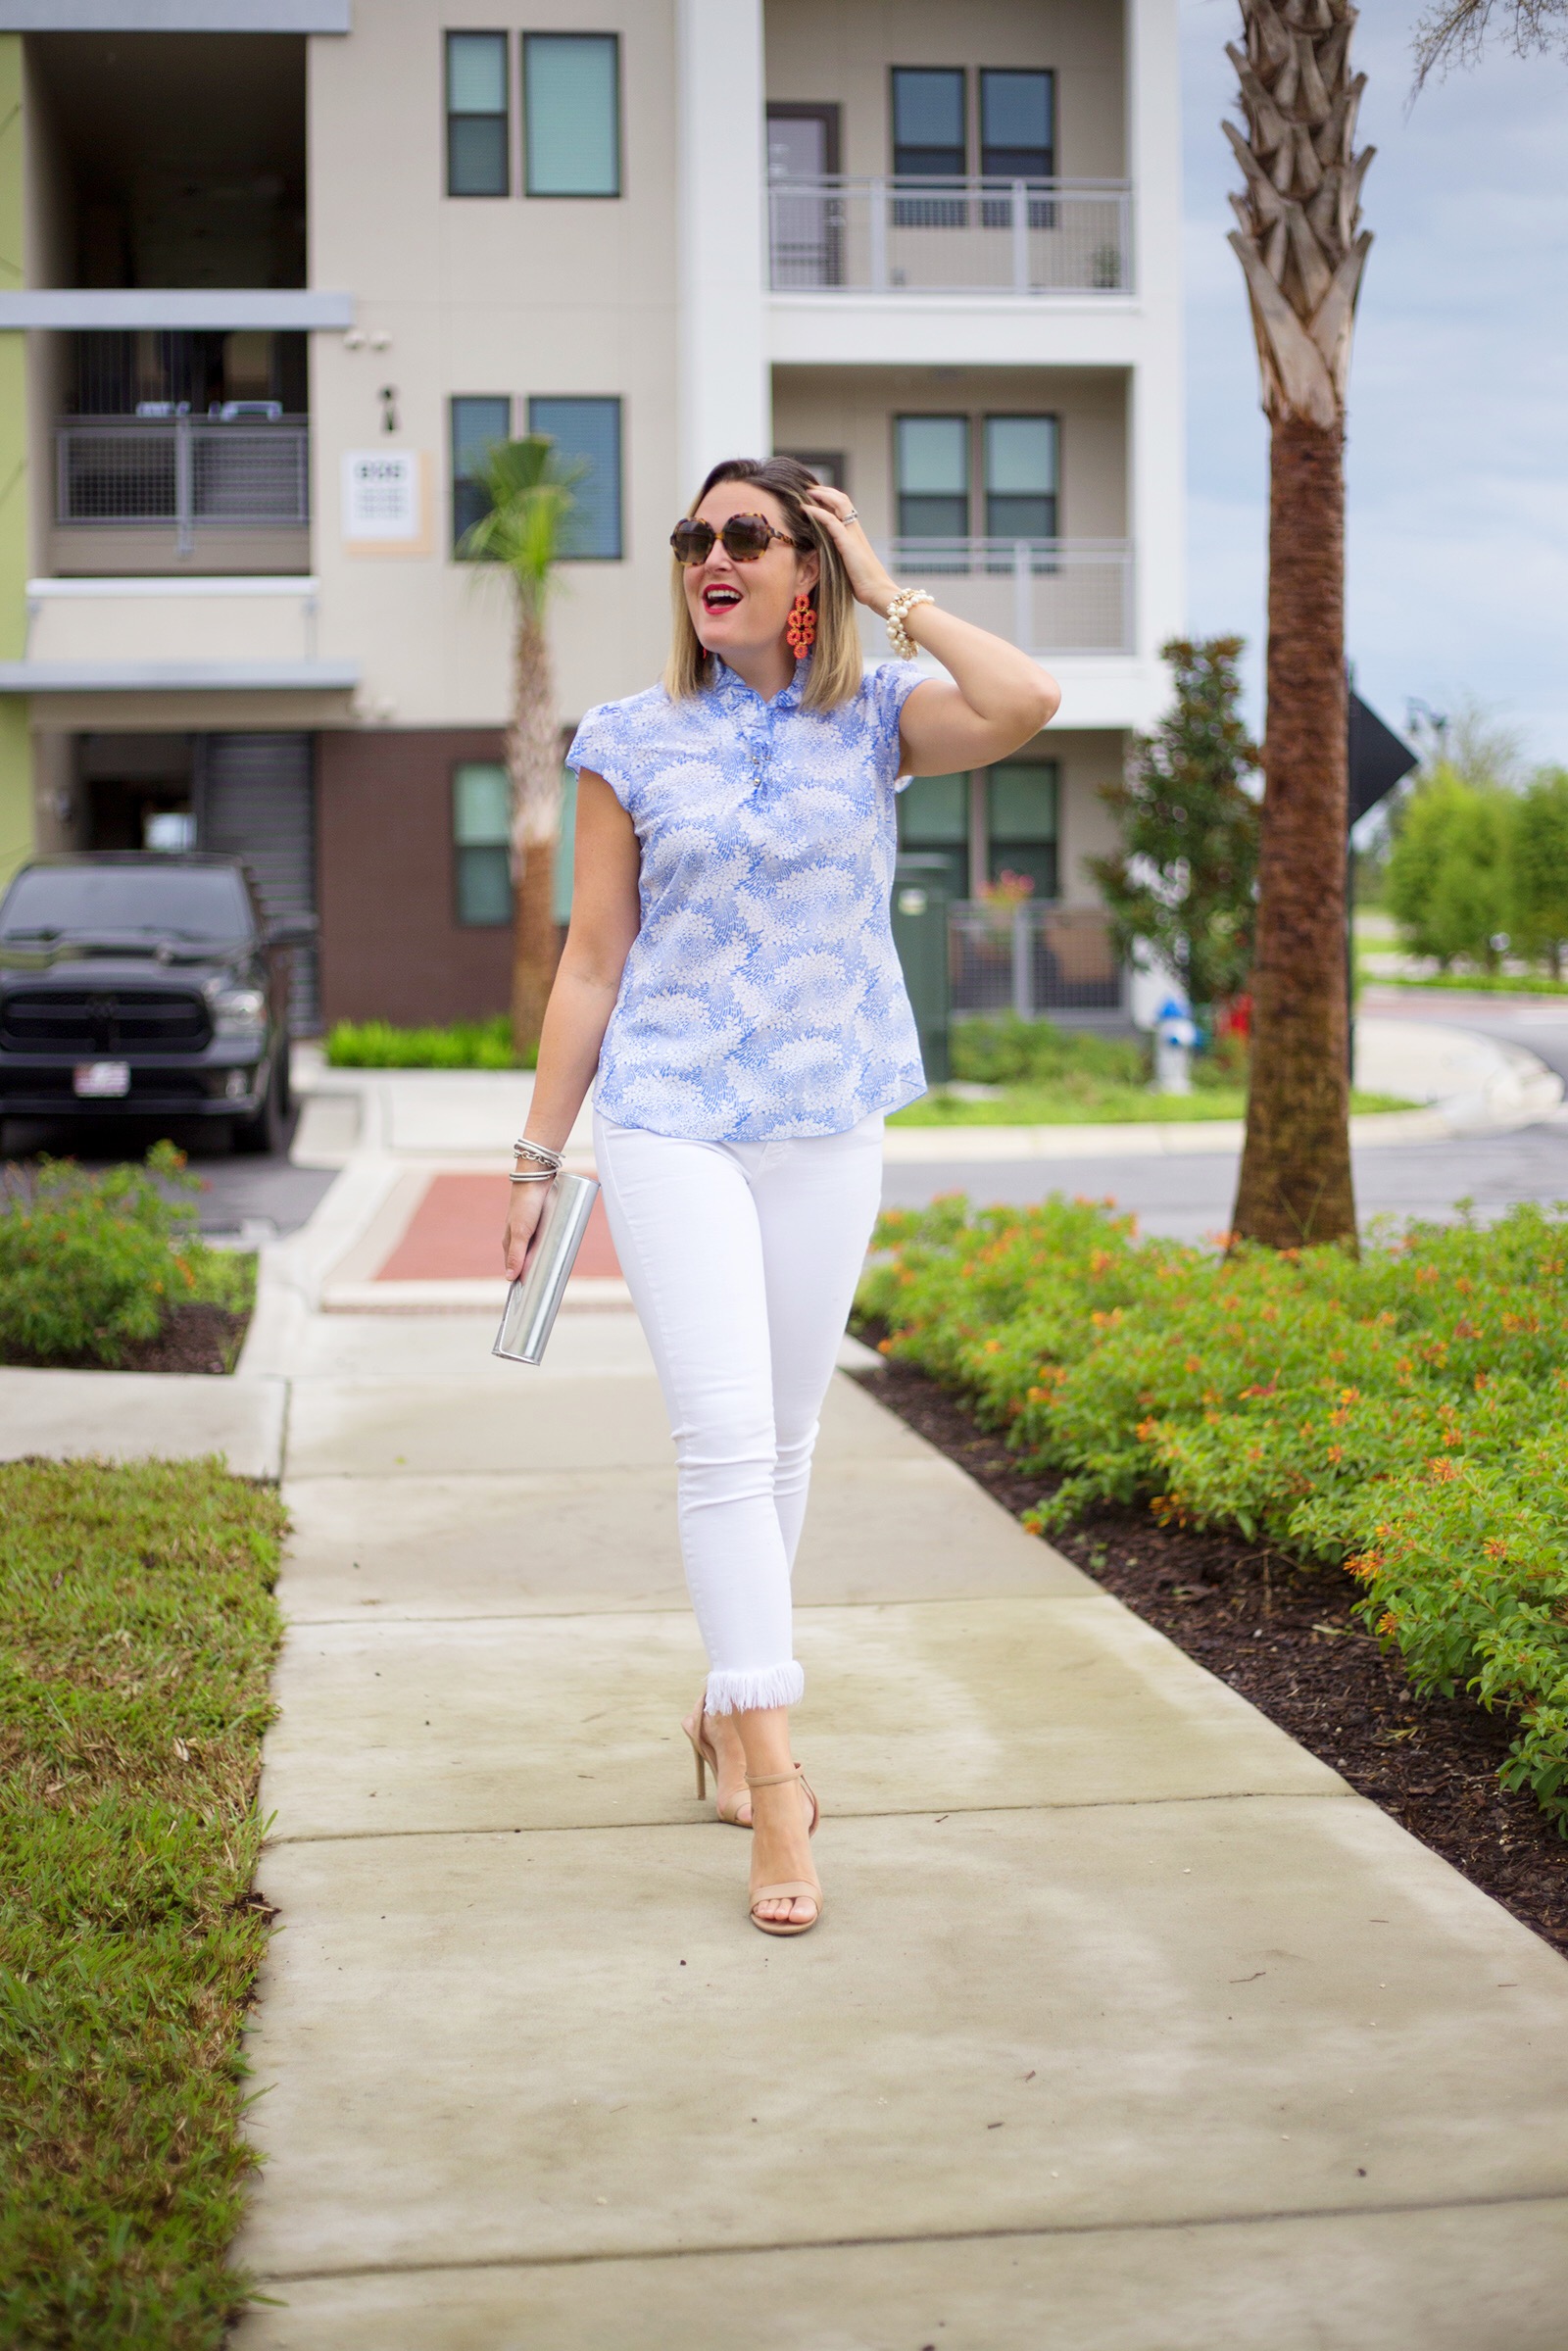 Florida lifestyle blogger, MikaelaJ, shares her next outfit for What I'm Wearing Wednesday! This outfit shines through the details! 